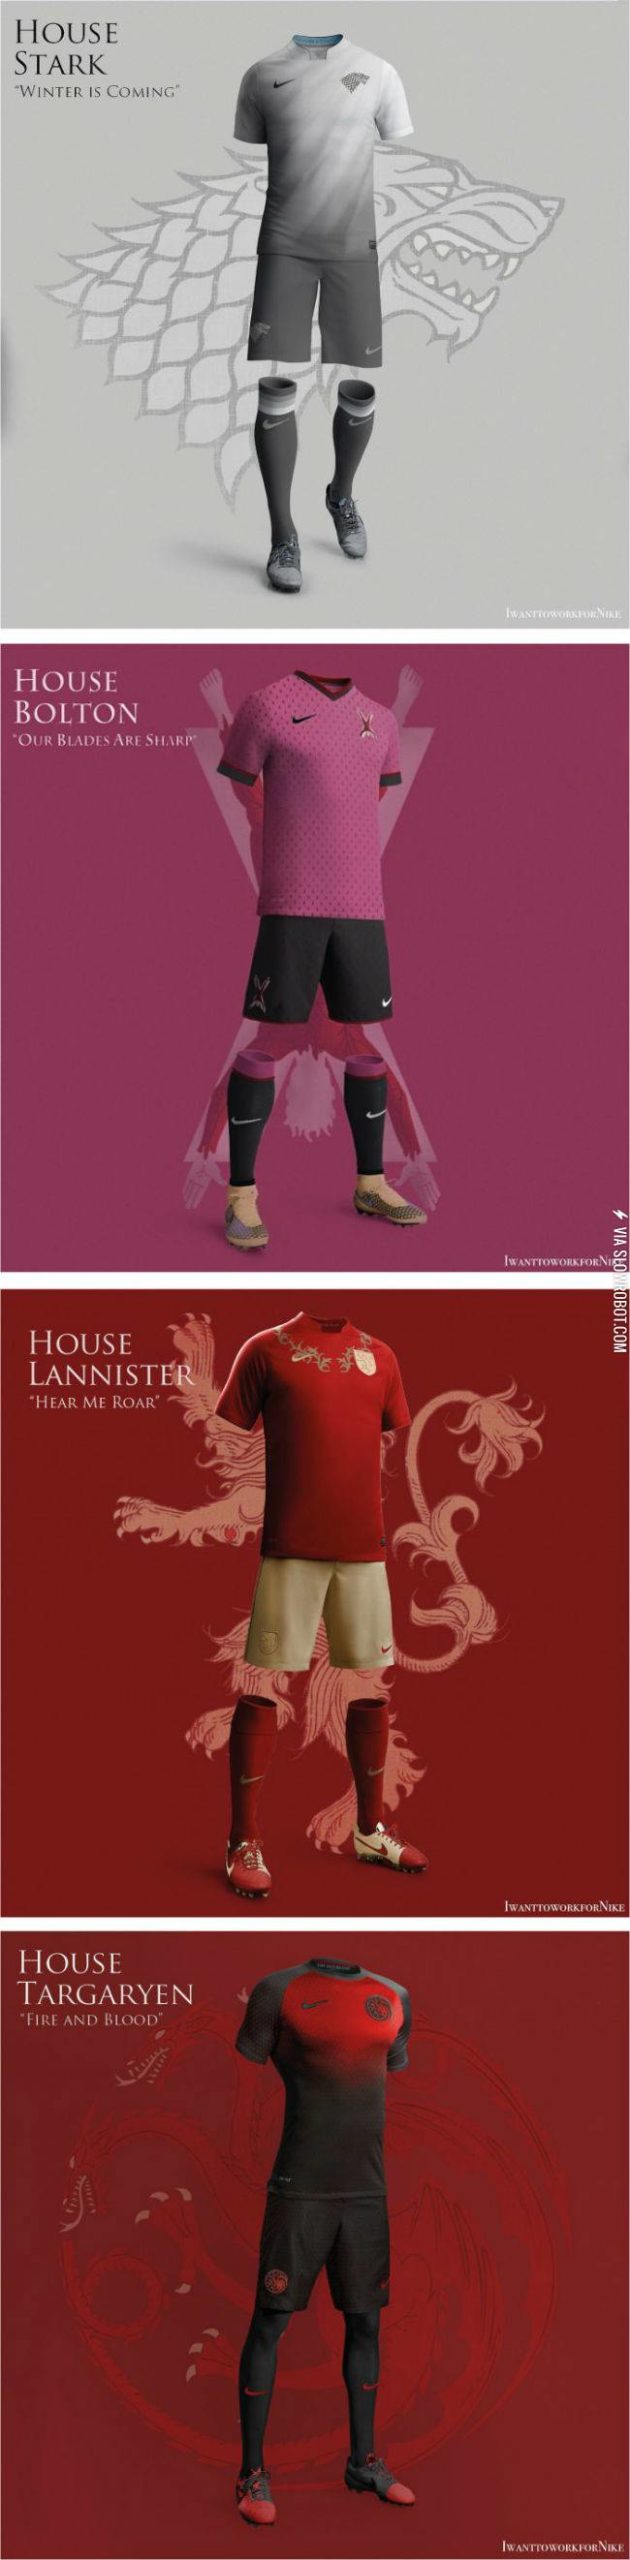 Game+of+Thrones+soccer+kits.